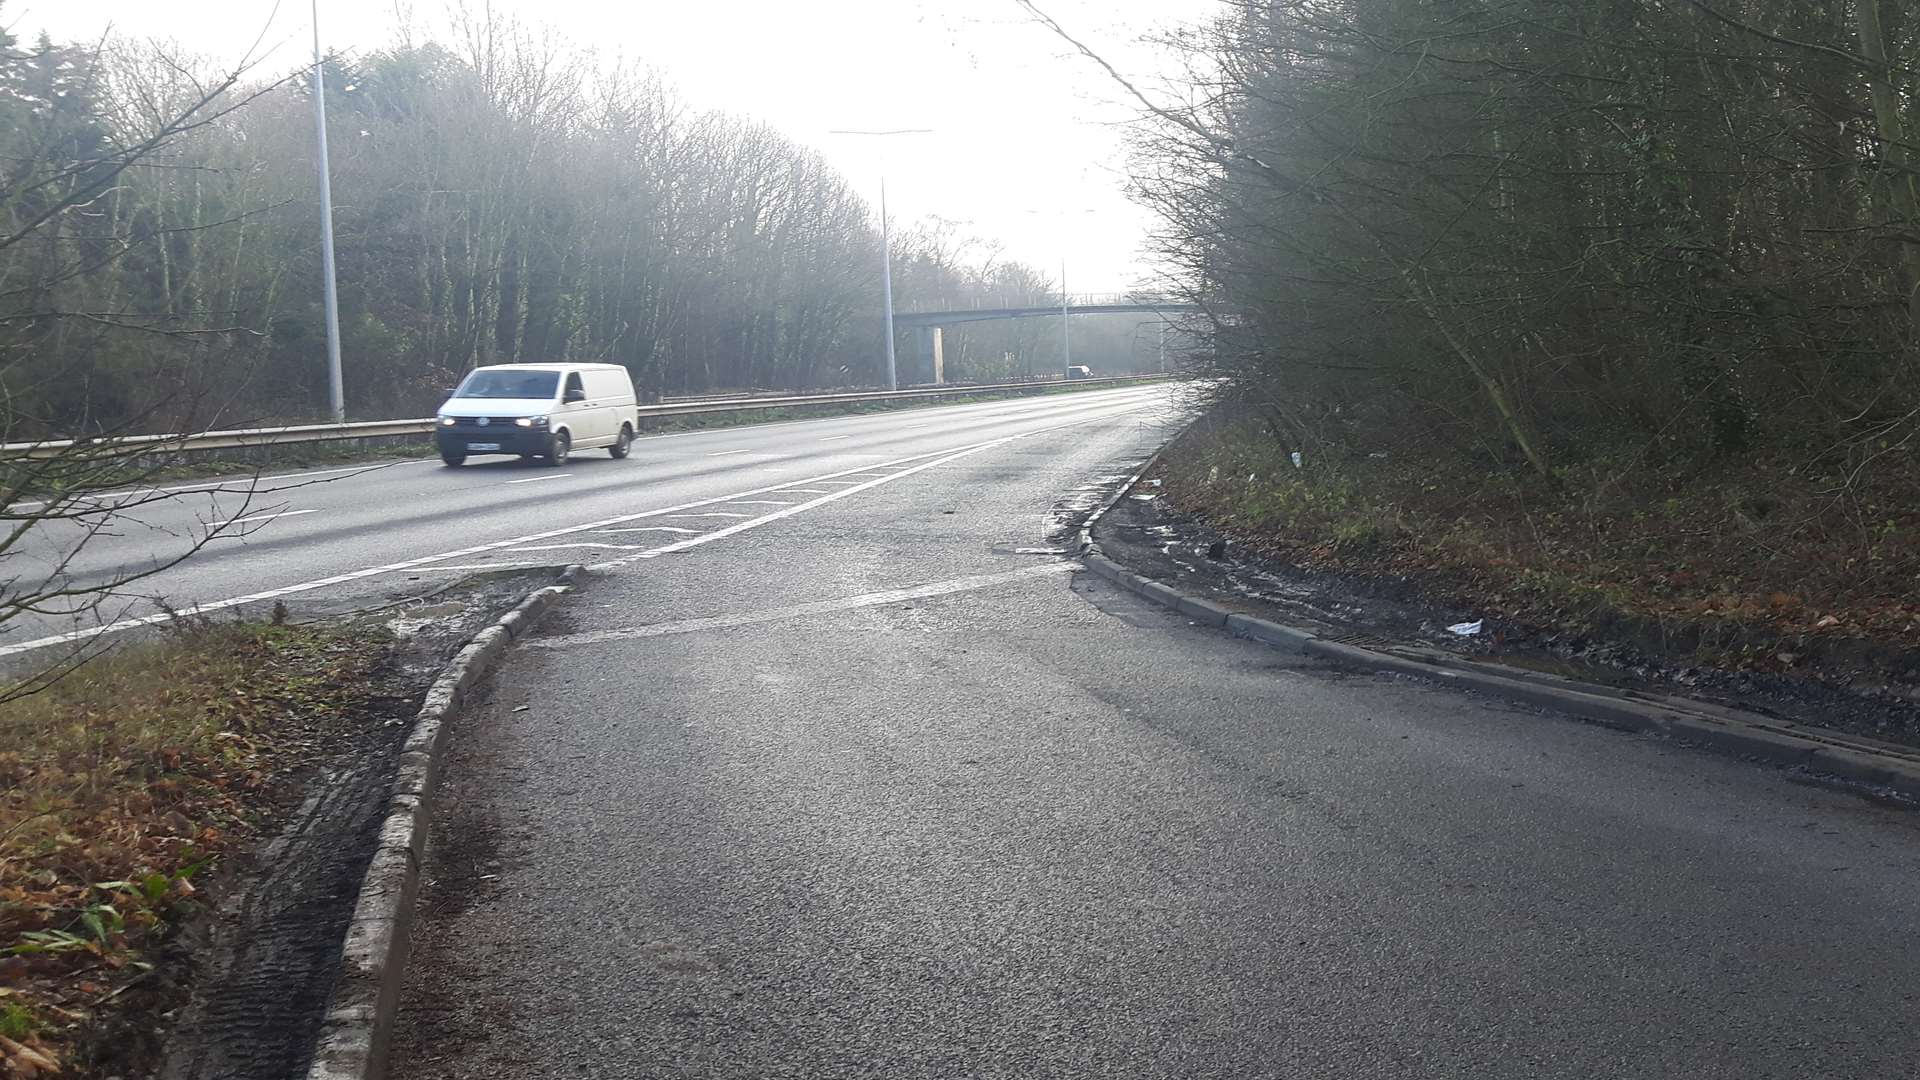 The collision occurred near a lay-by off the A2